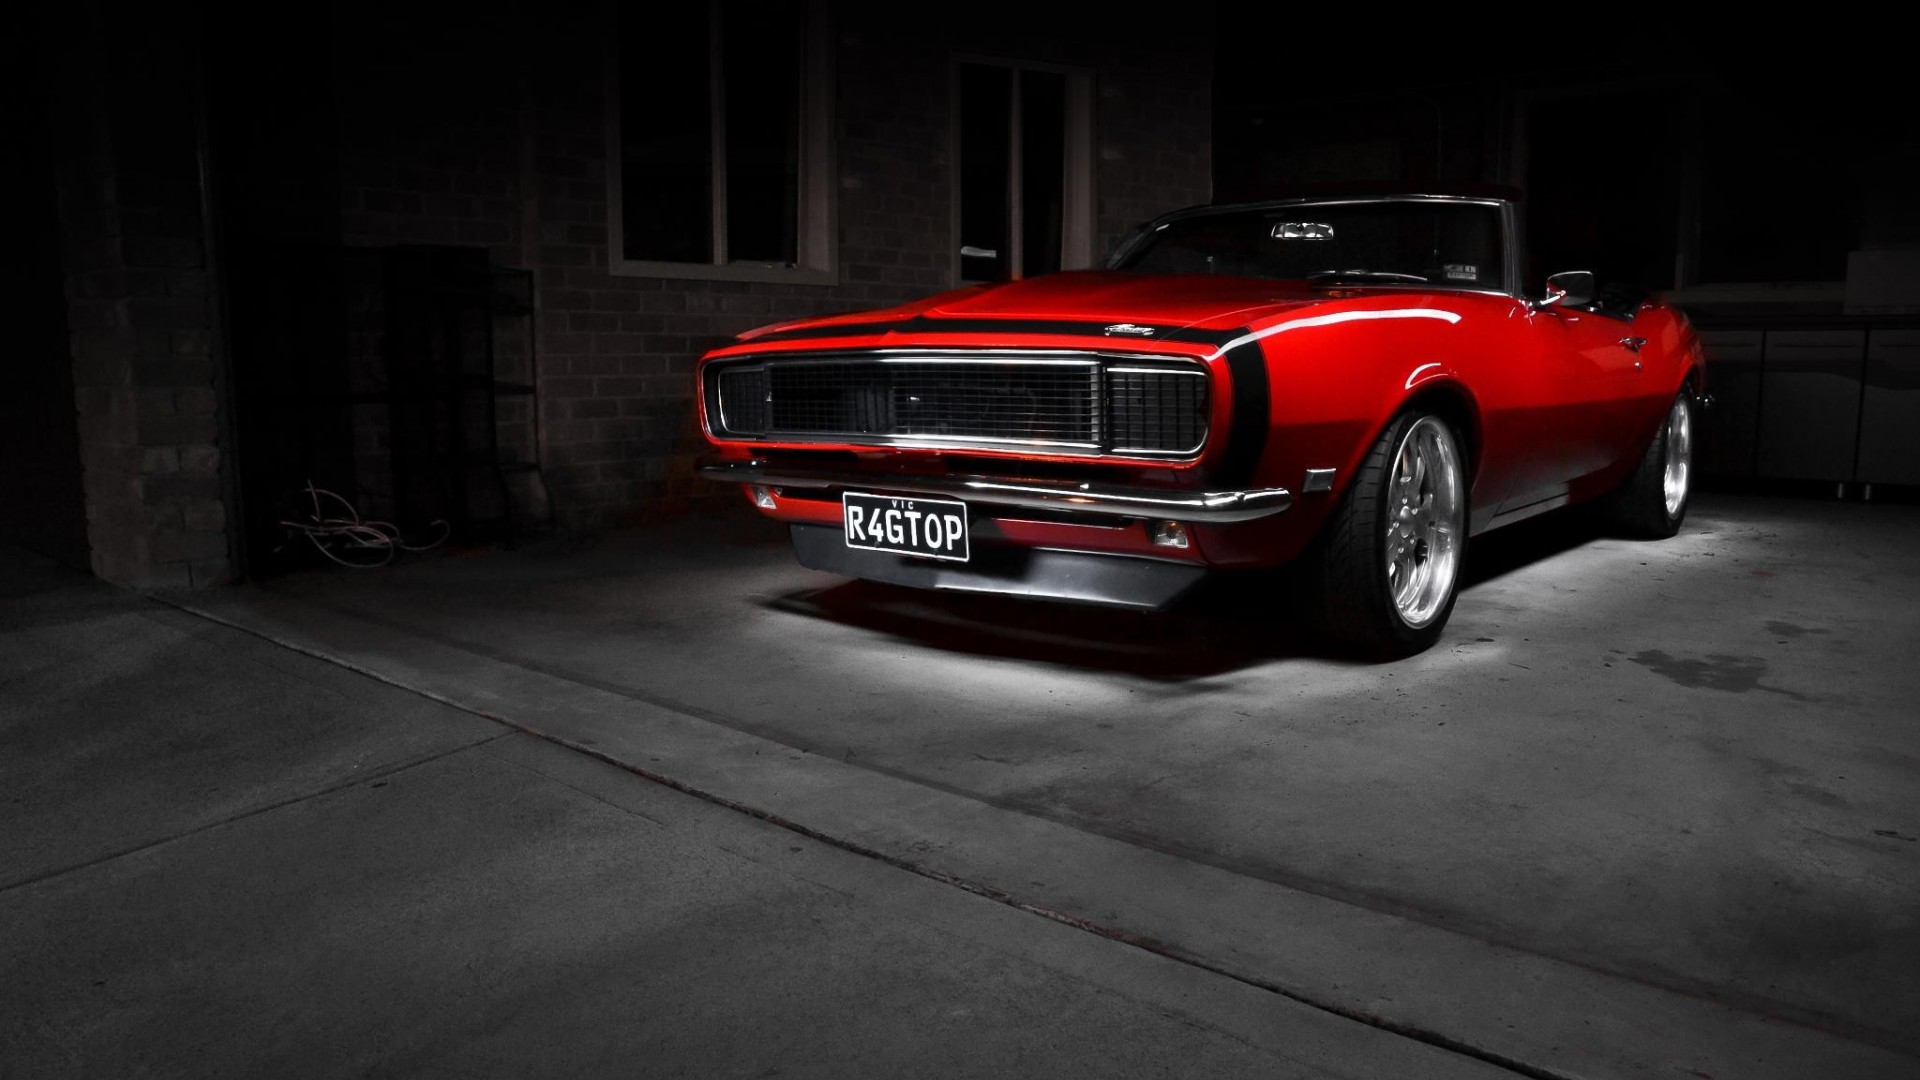 Hd Wallpapers 1920x1080 Muscle Cars